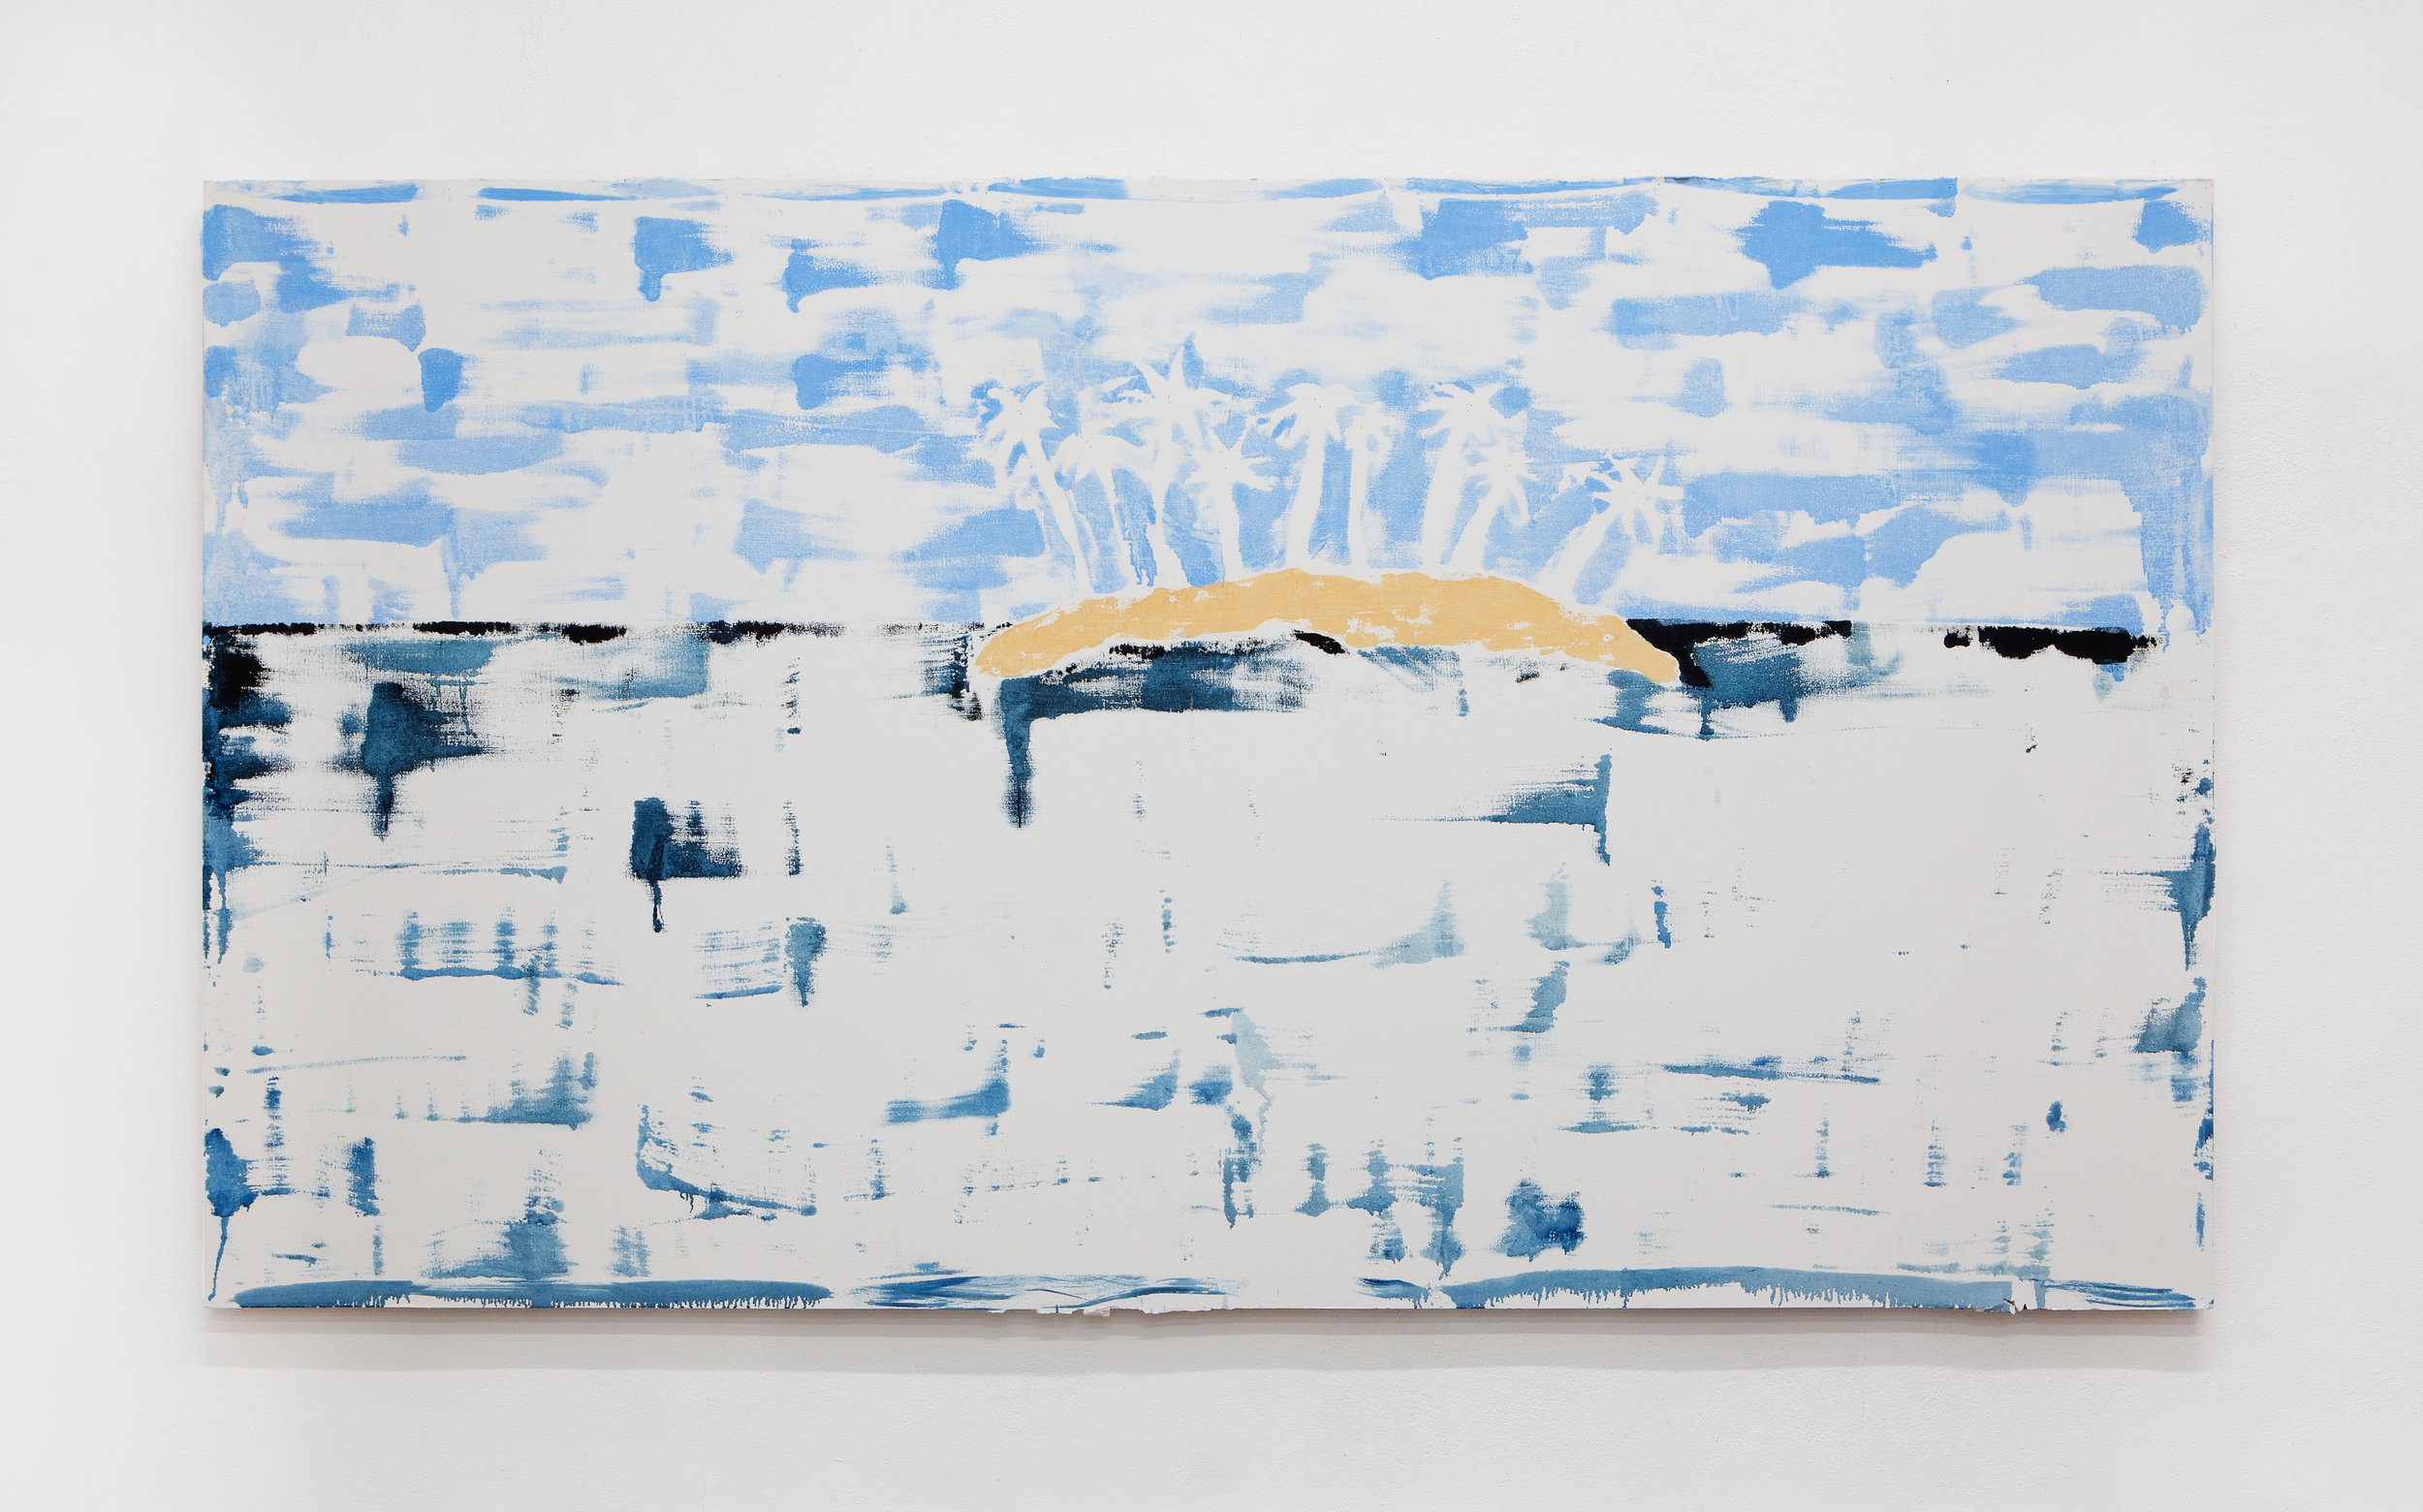  Emilie Gossiaux,  Island After Image , 2018, oil paint on gypsum, 60 x 108 inches 